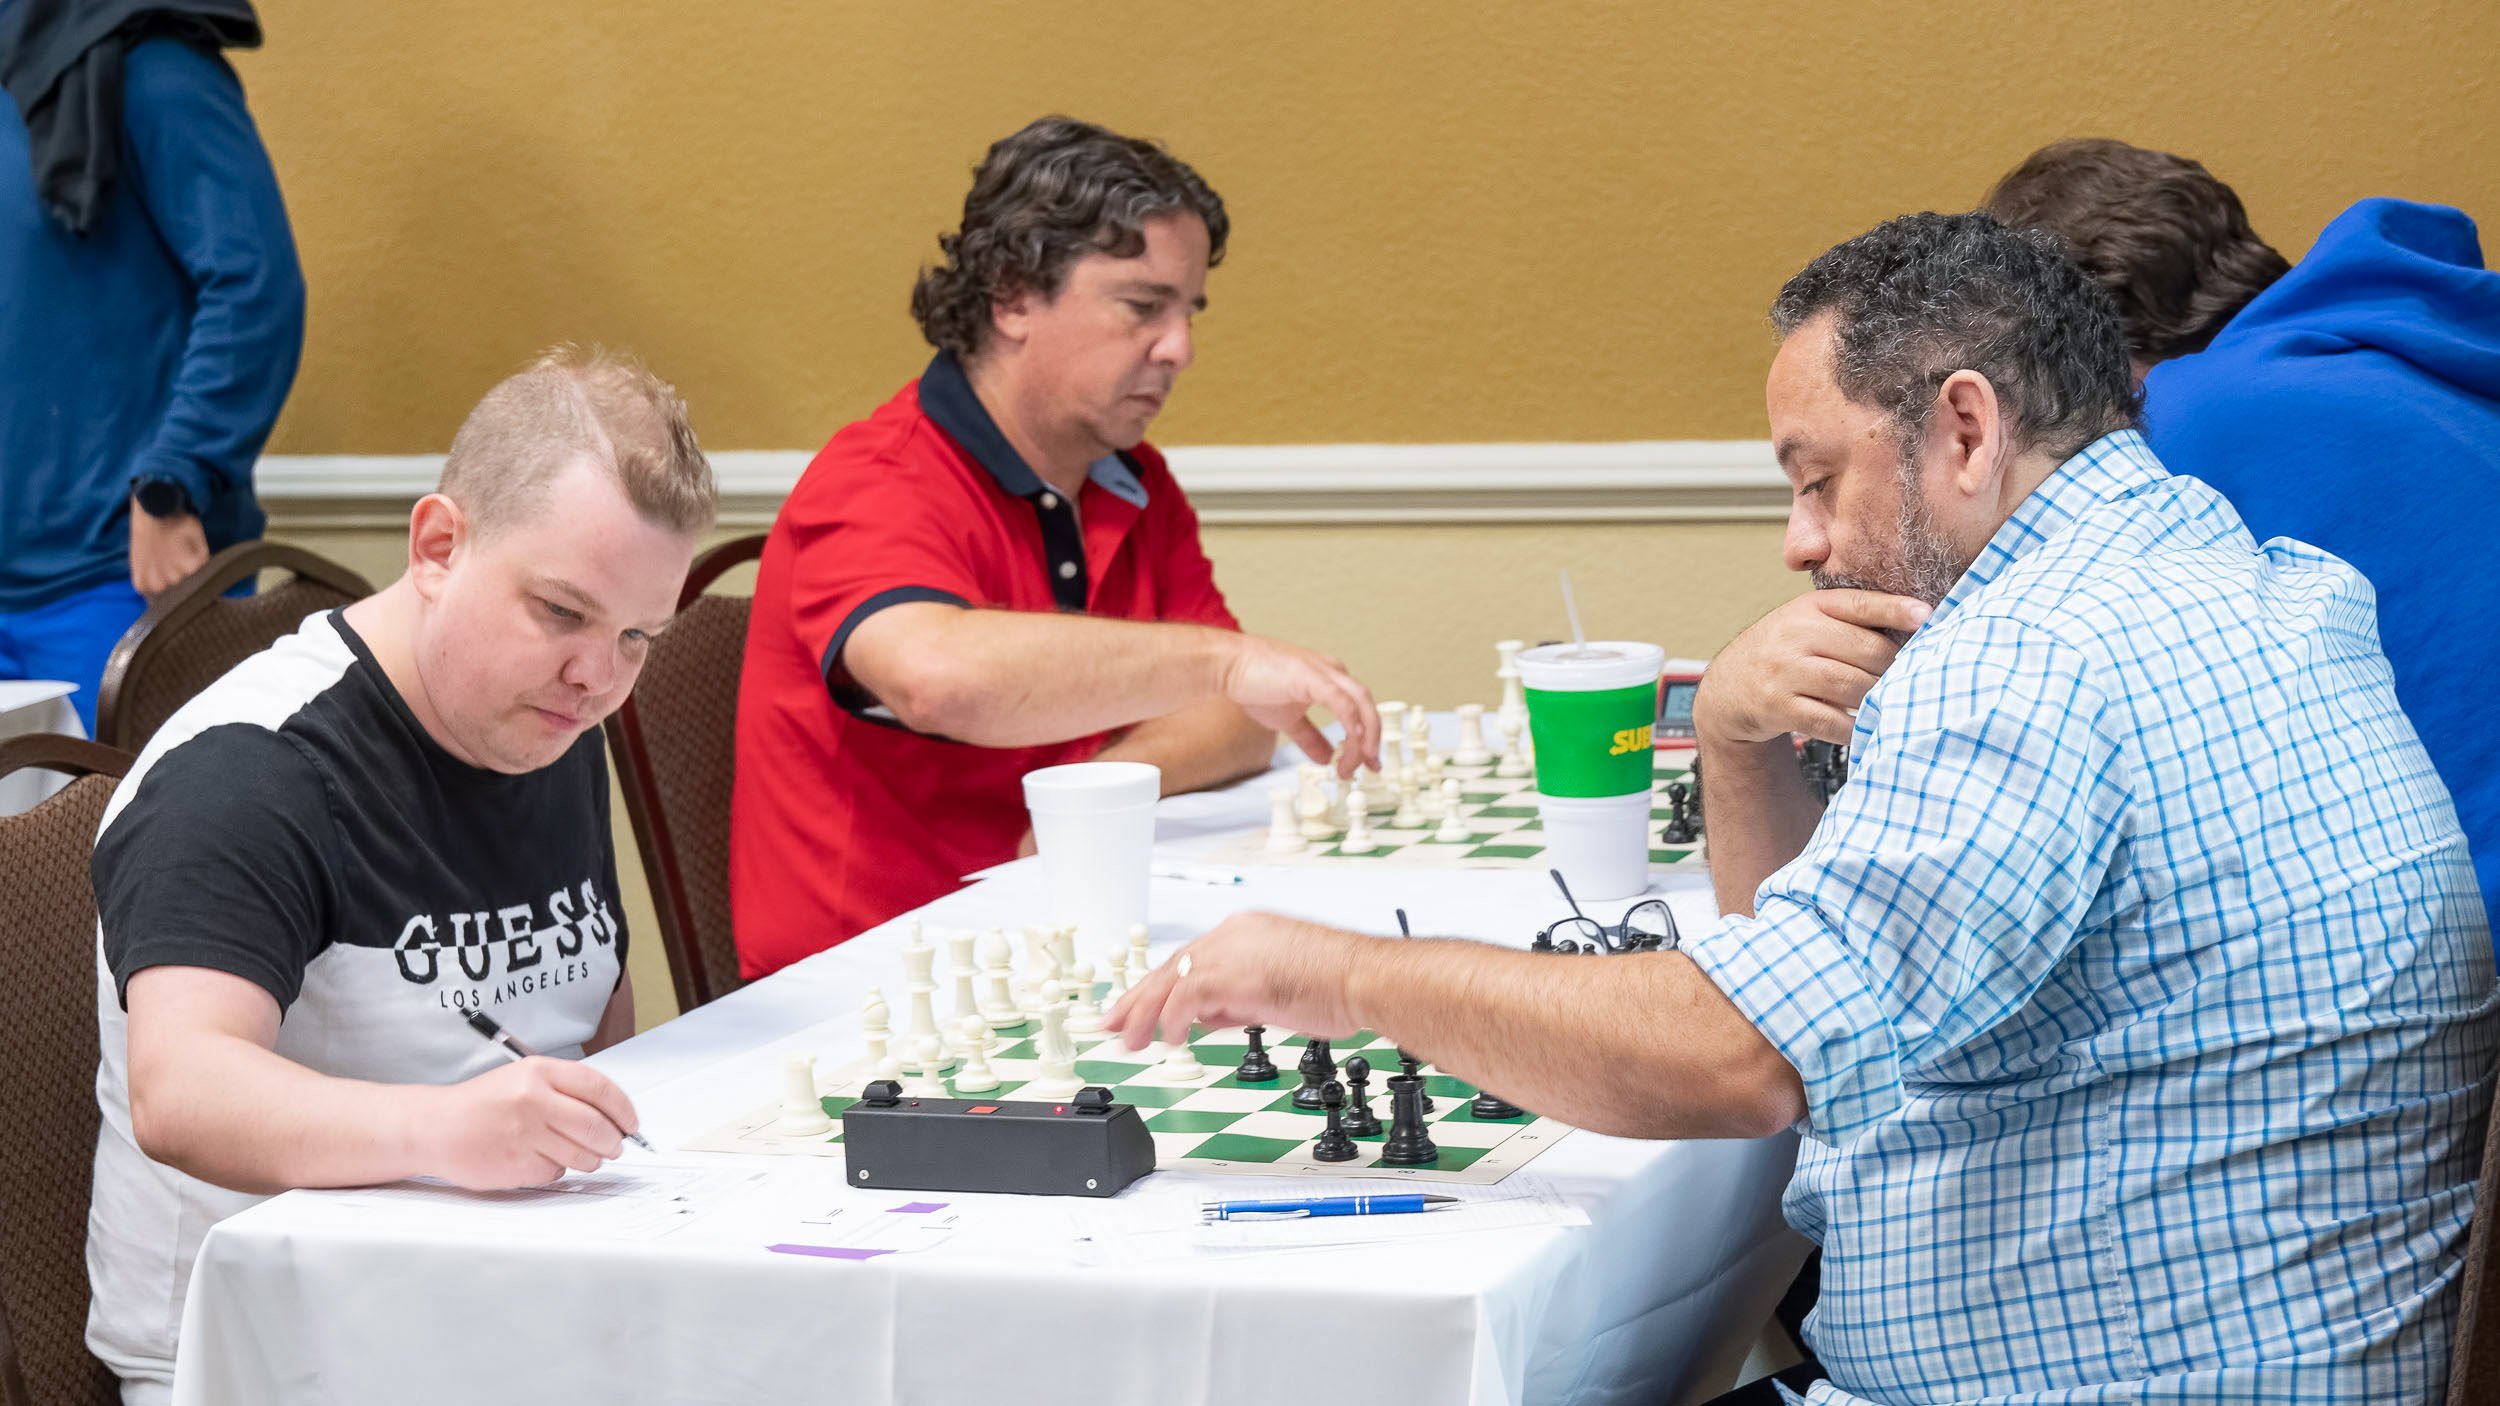 2023 Daily Chess Championship Registration Now Open 